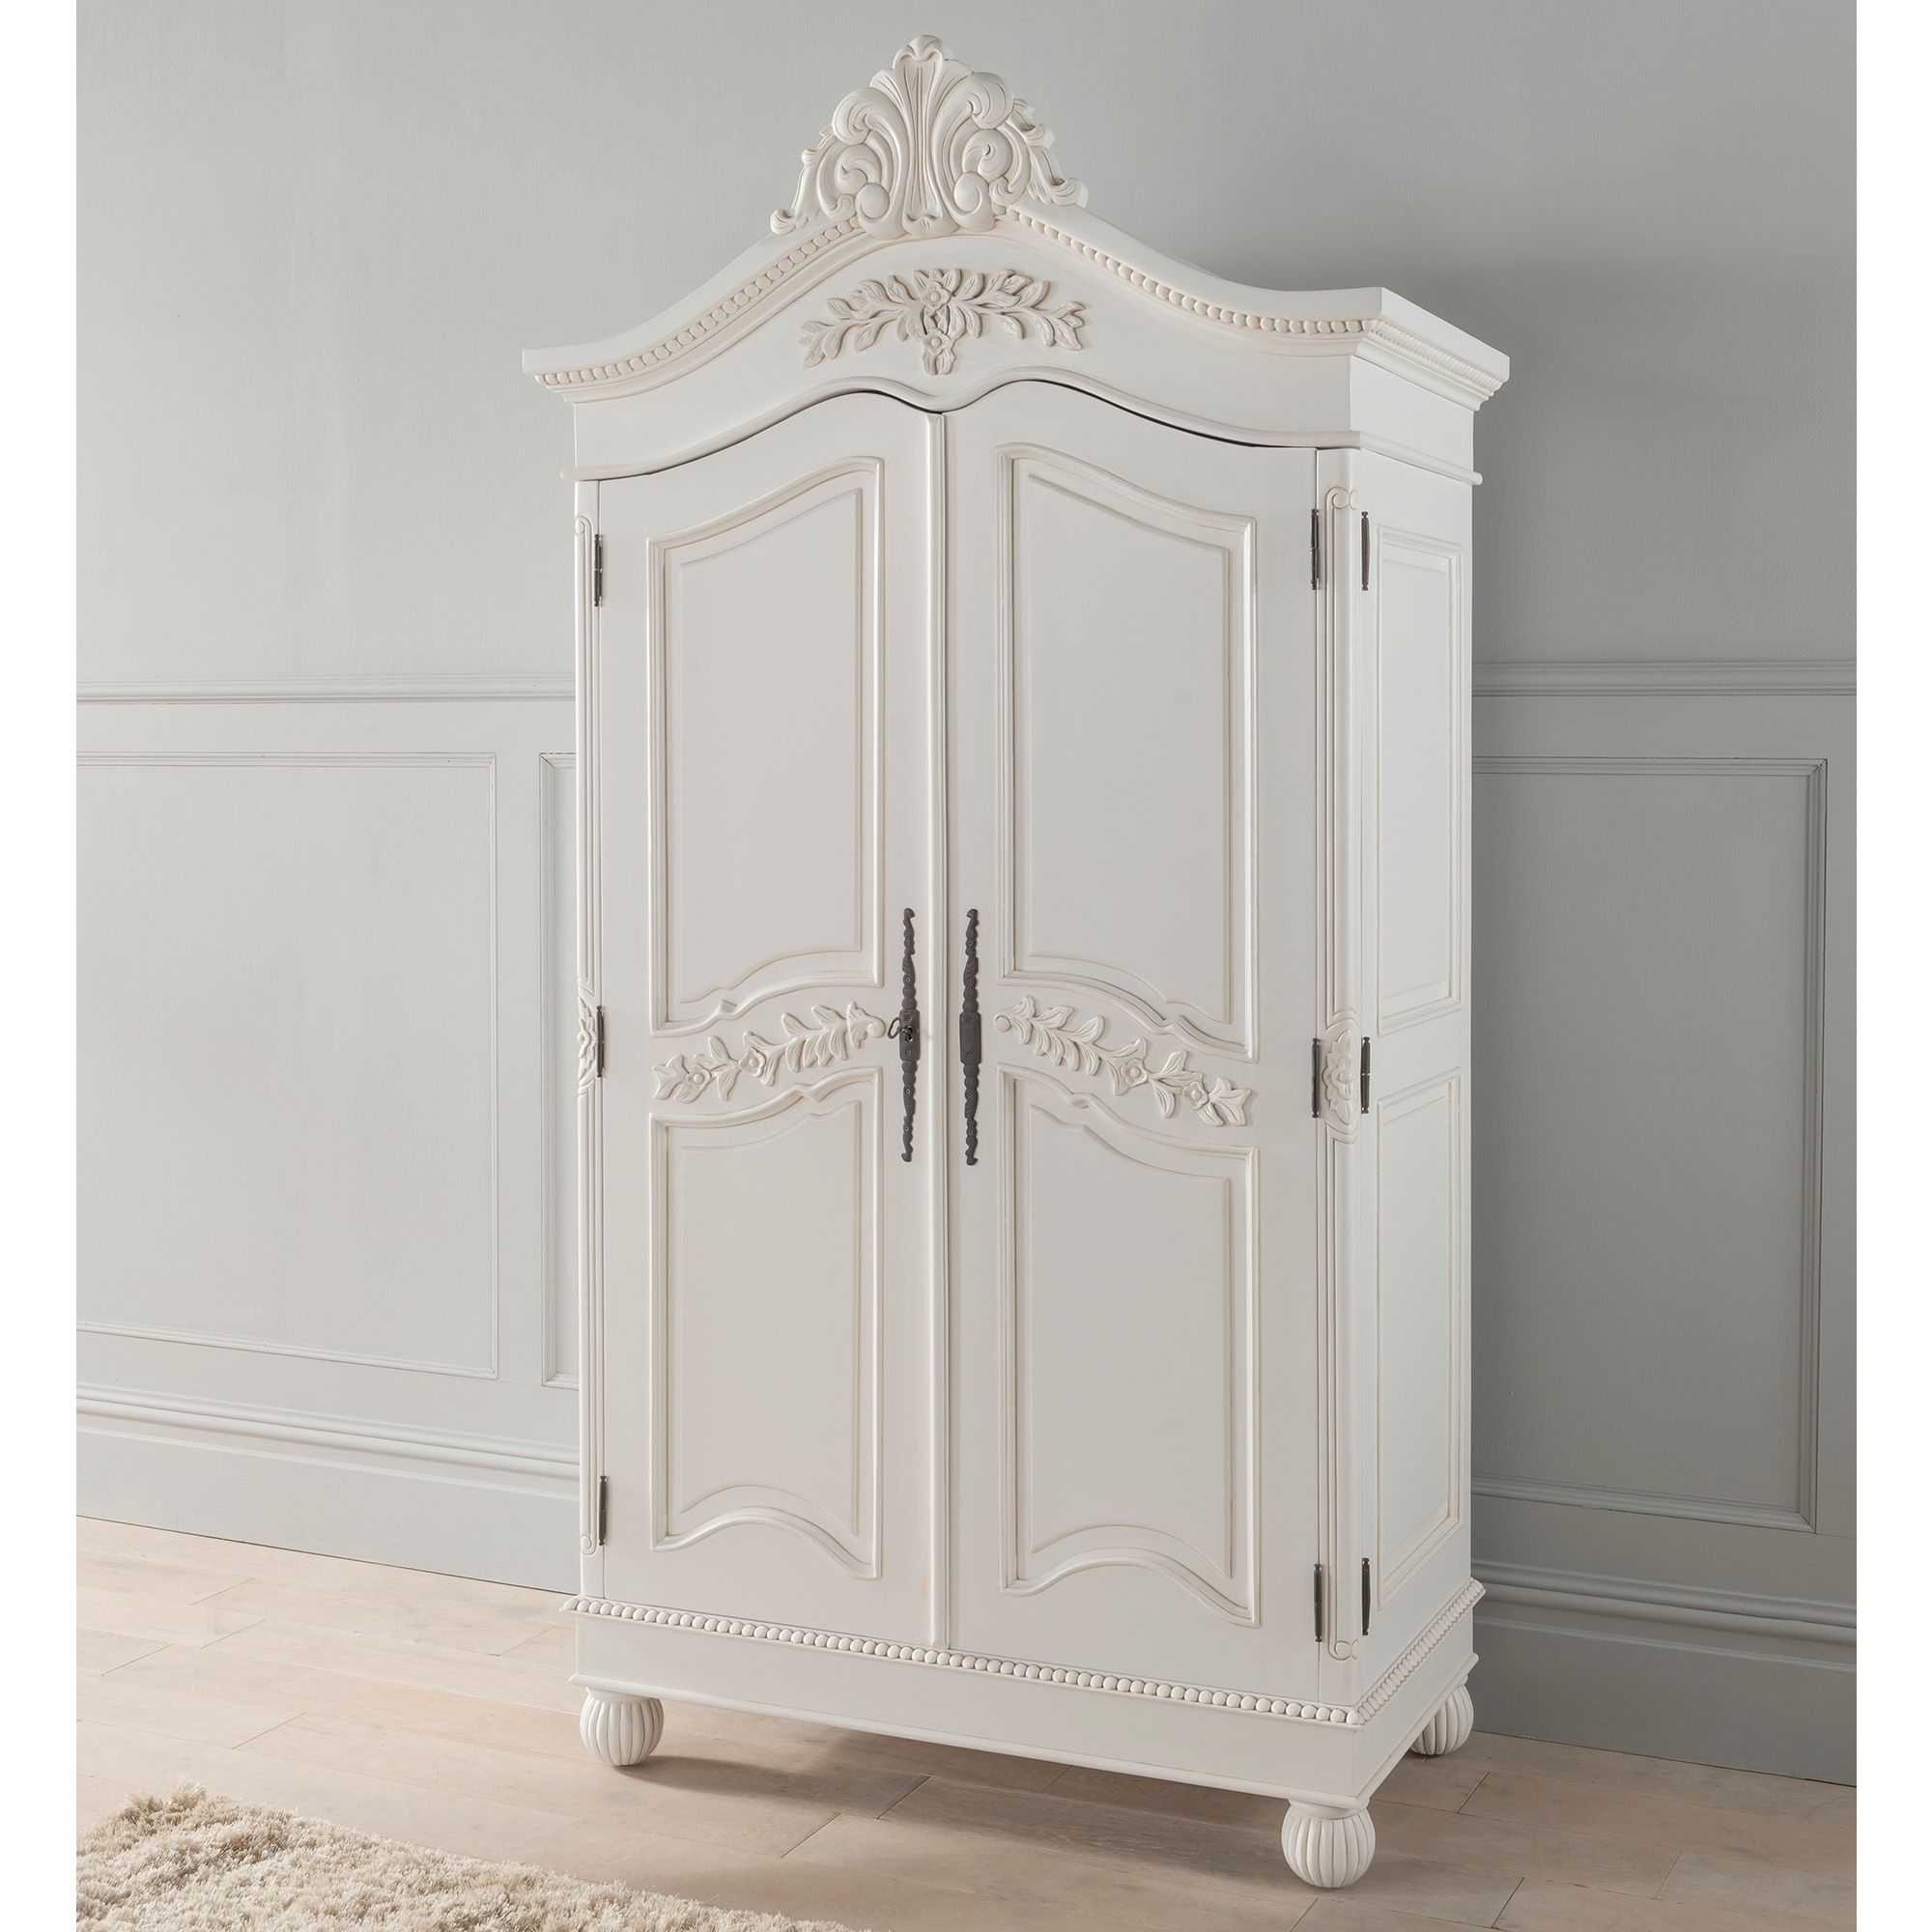 Antique French Style Wardrobe | Shabby Chic Bedroom Furniture Throughout Shabby Chic Wardrobes For Sale (Photo 6 of 15)